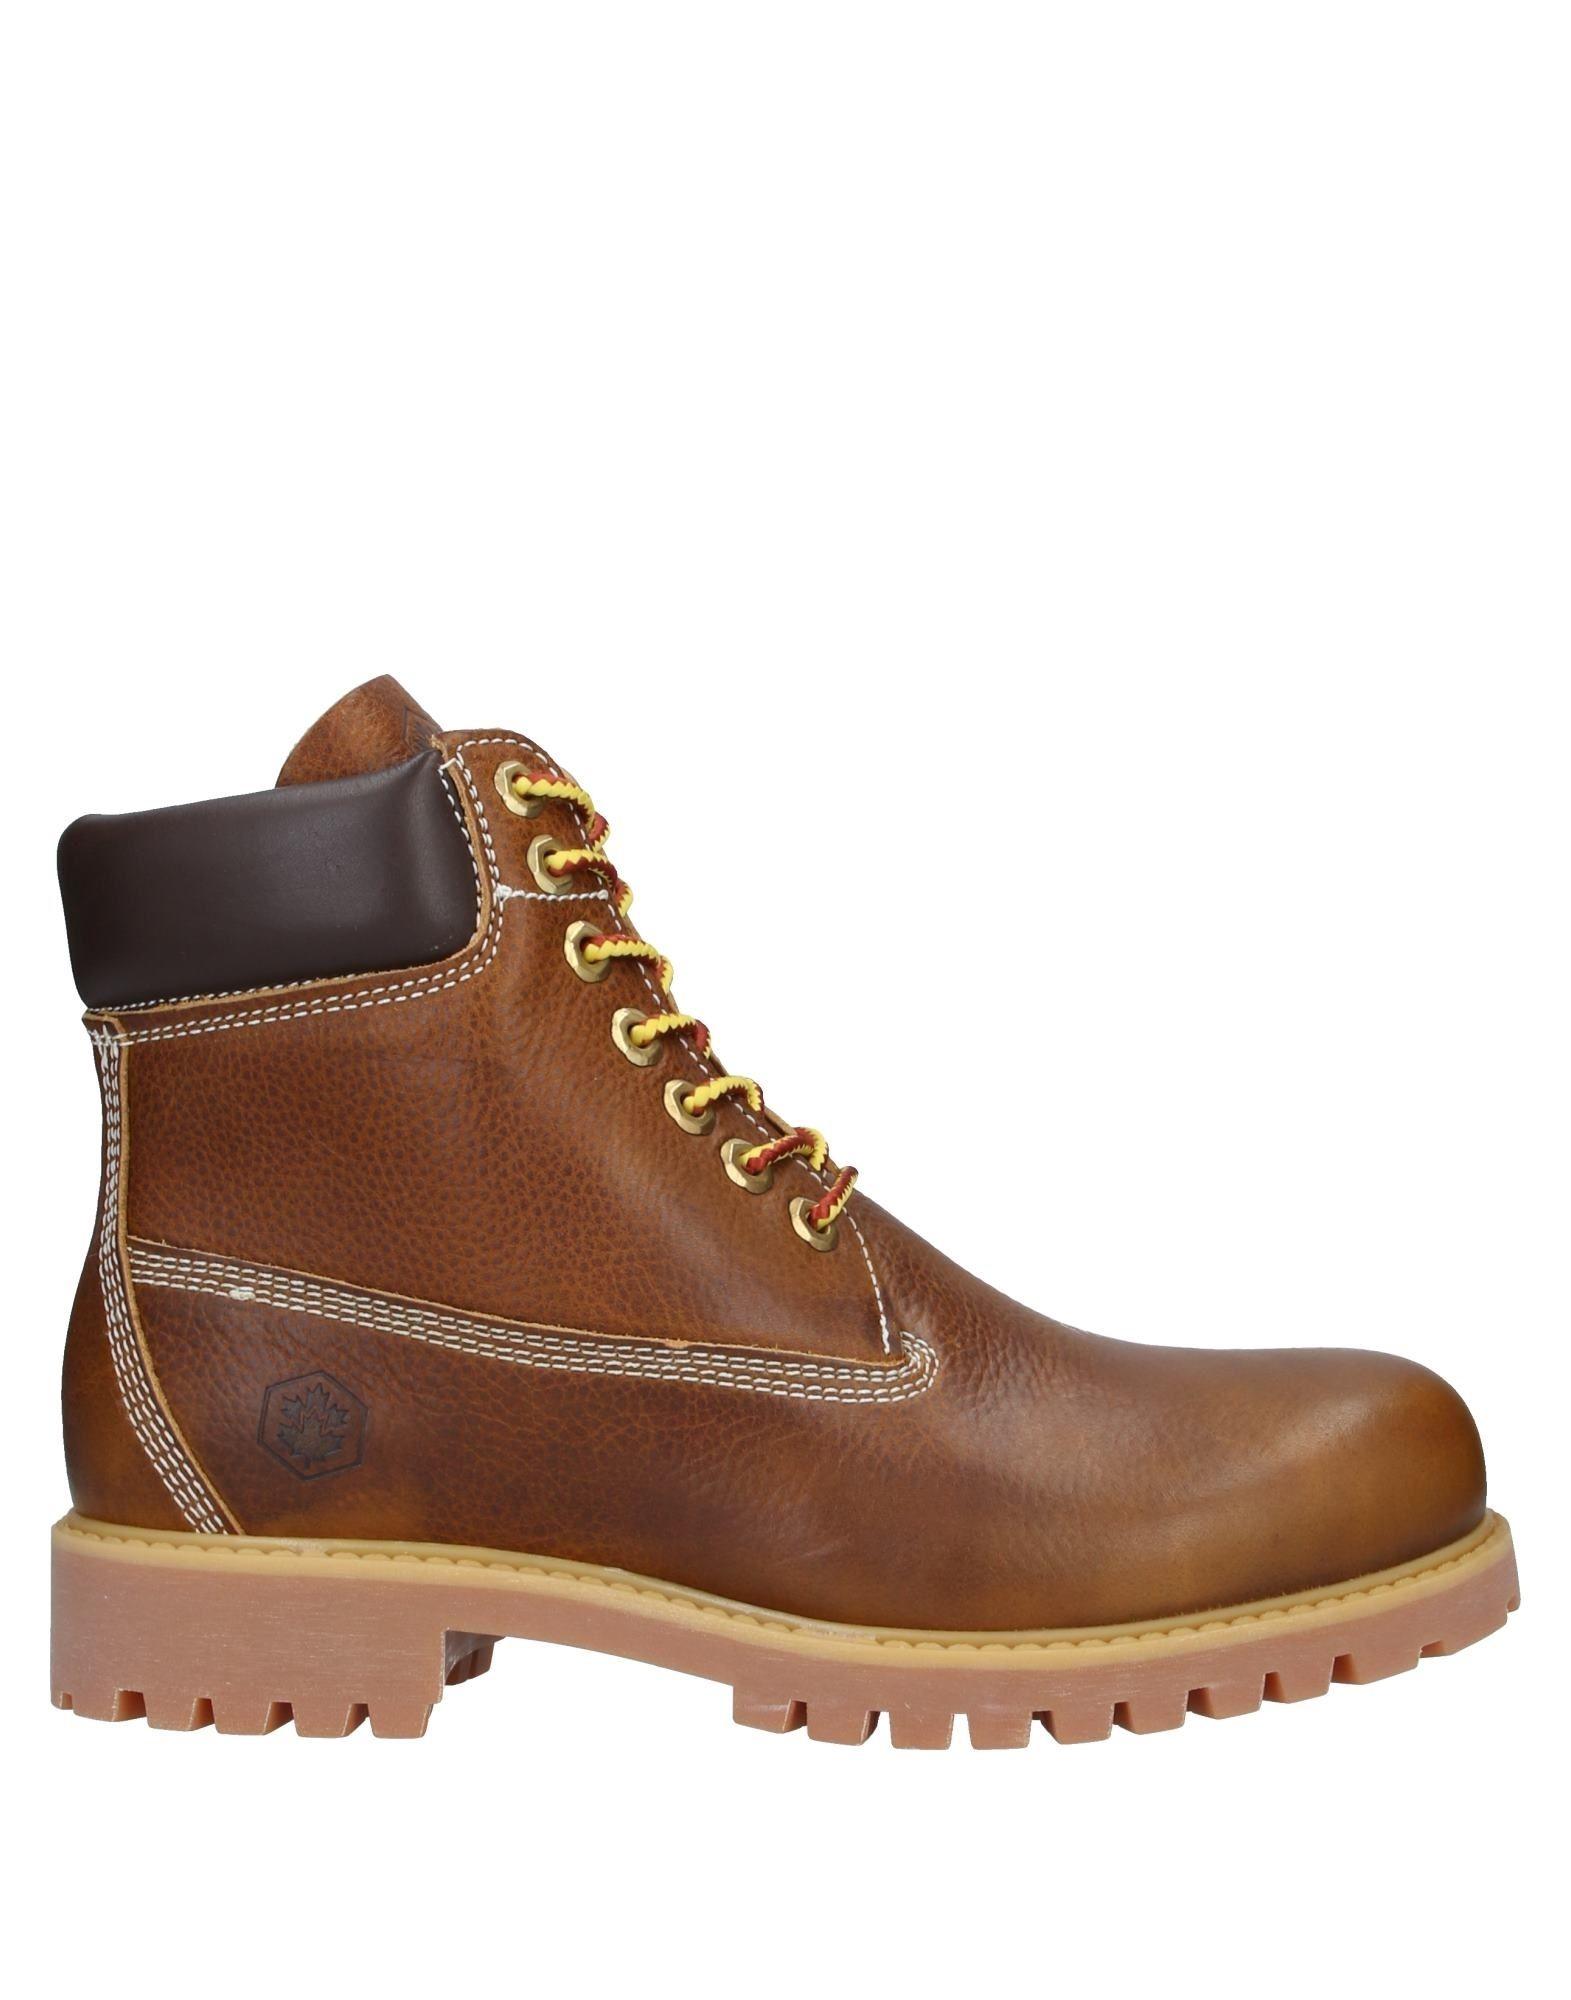 Lumberjack Leather Ankle Boots in Brown for Men - Lyst